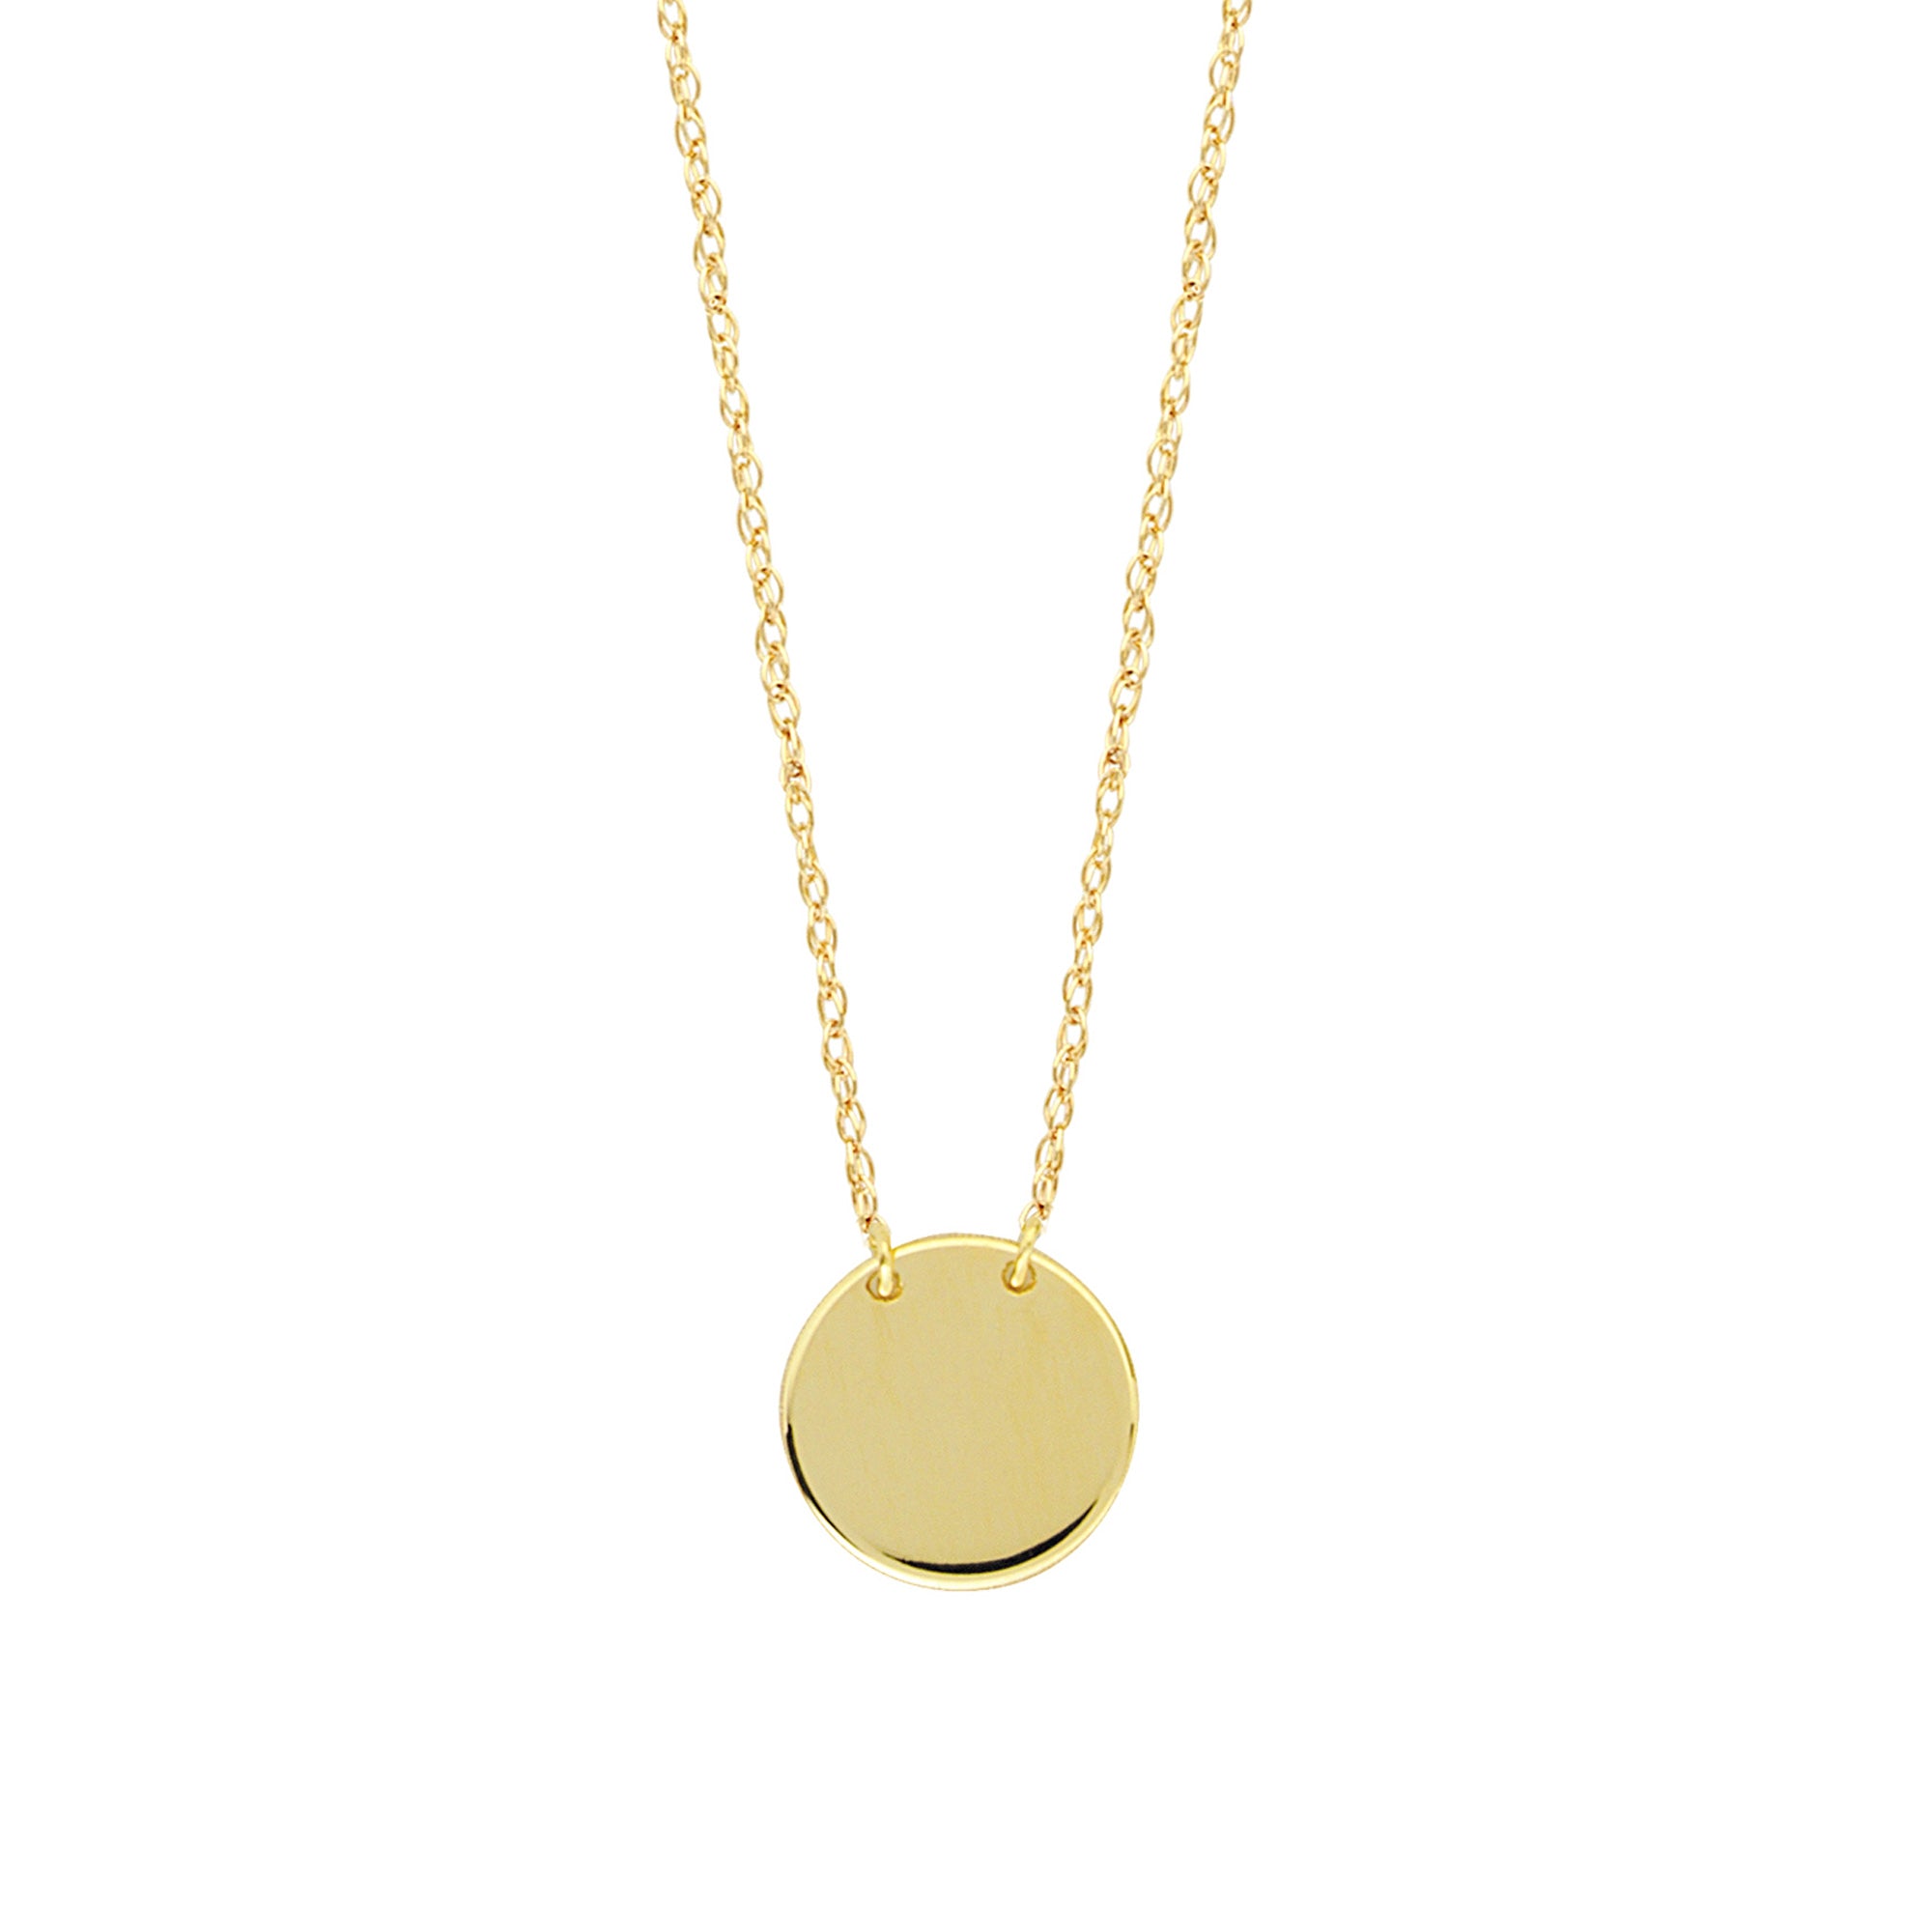 14K Yellow Gold Mini Engravable Disk Pendant Necklace, 16" To 18" Adjustable fine designer jewelry for men and women